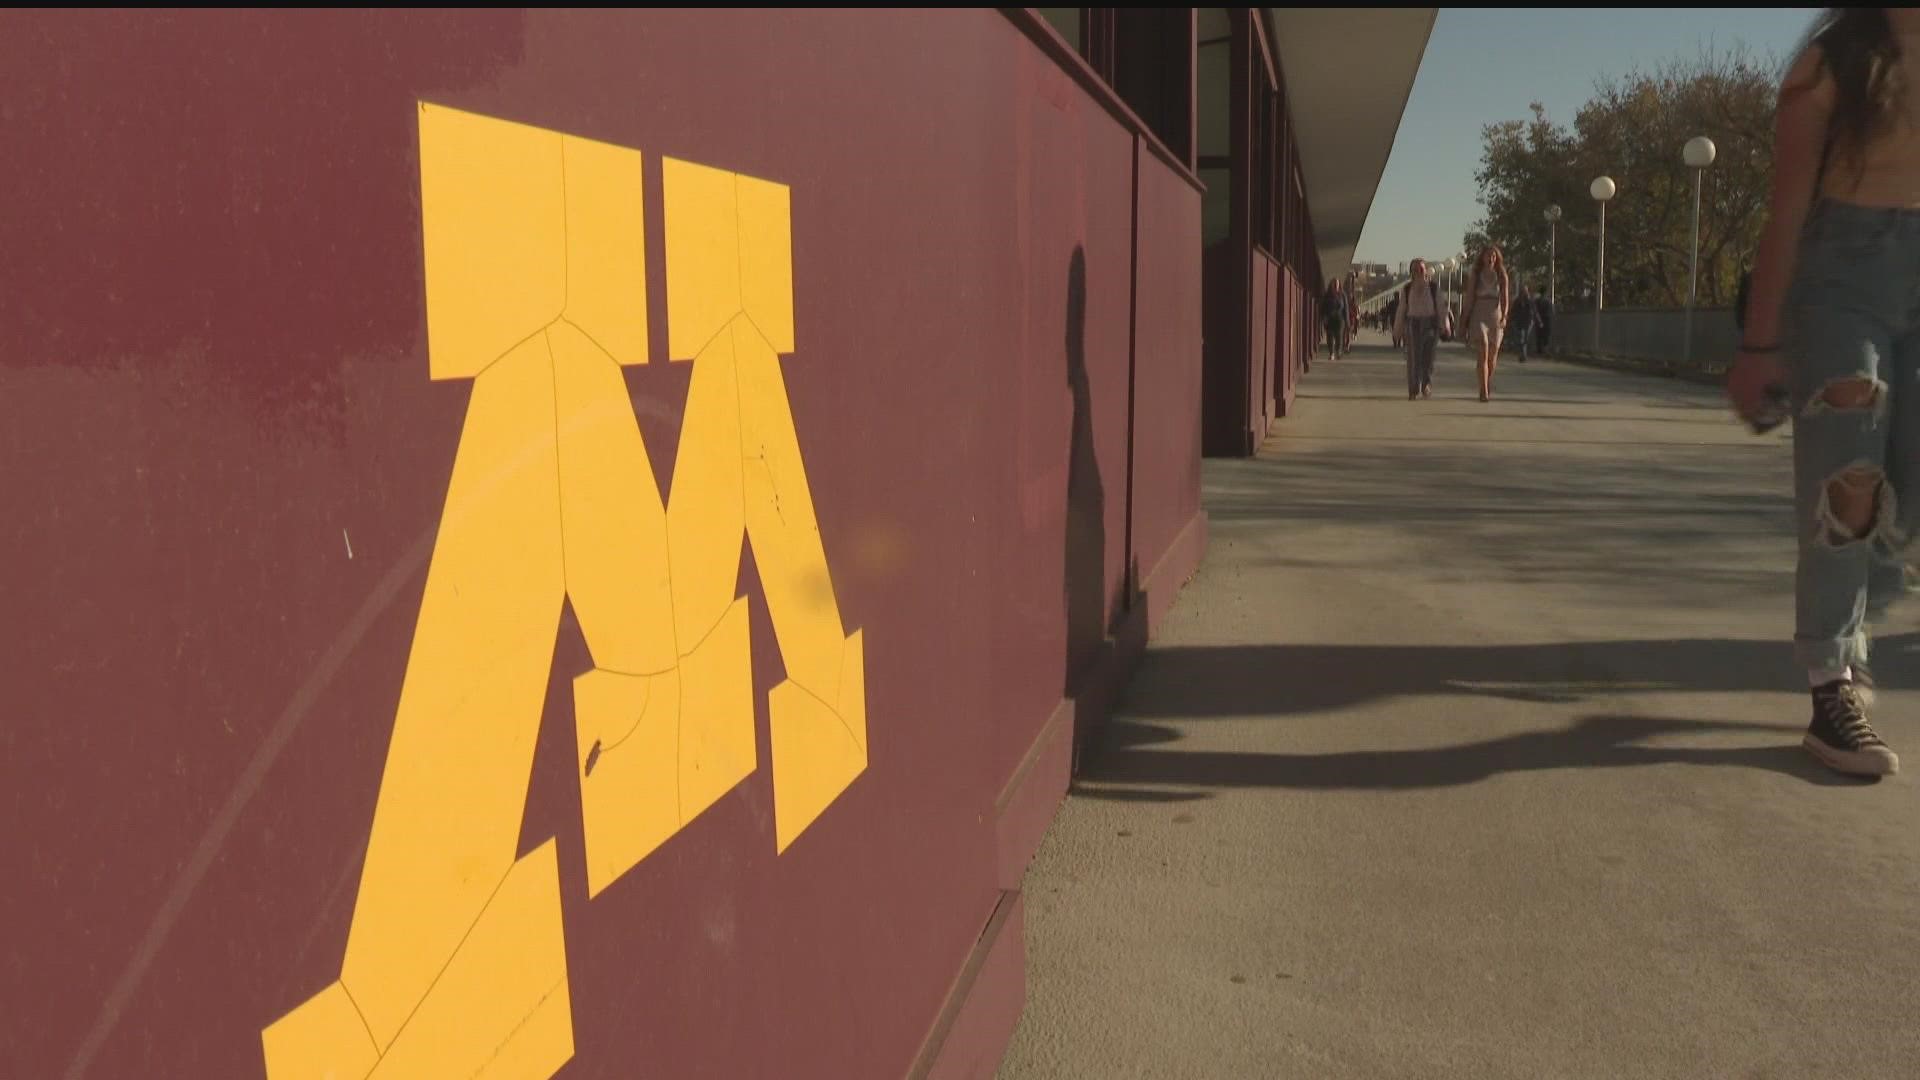 A University of Minnesota program - Public Life Project - is trying to open up the conversation between different sides.